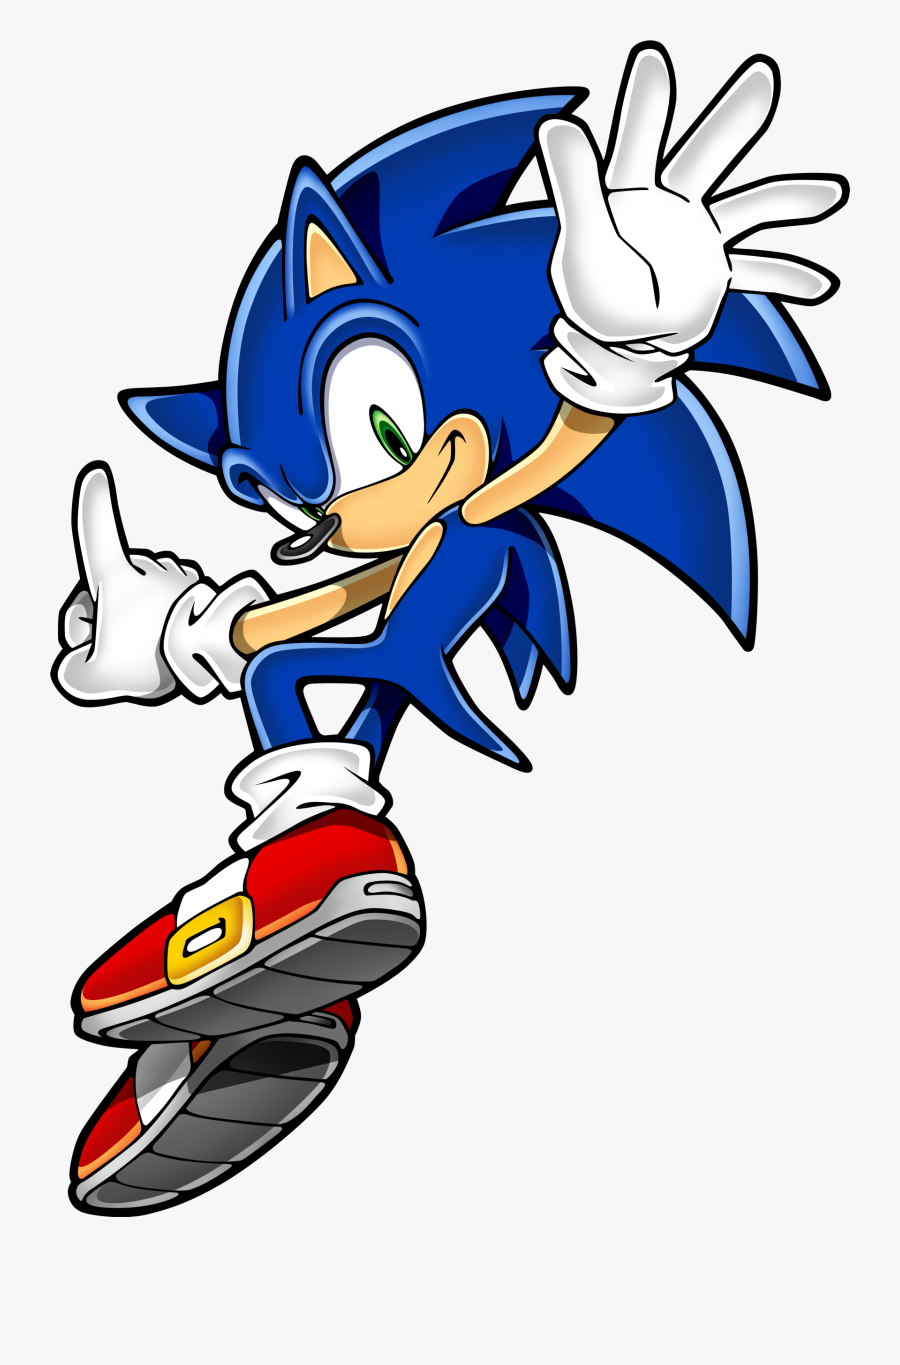 Sonic The Hedgehog Hd Clipart - Sonic The Hedgehog Png, Transparent Clipart